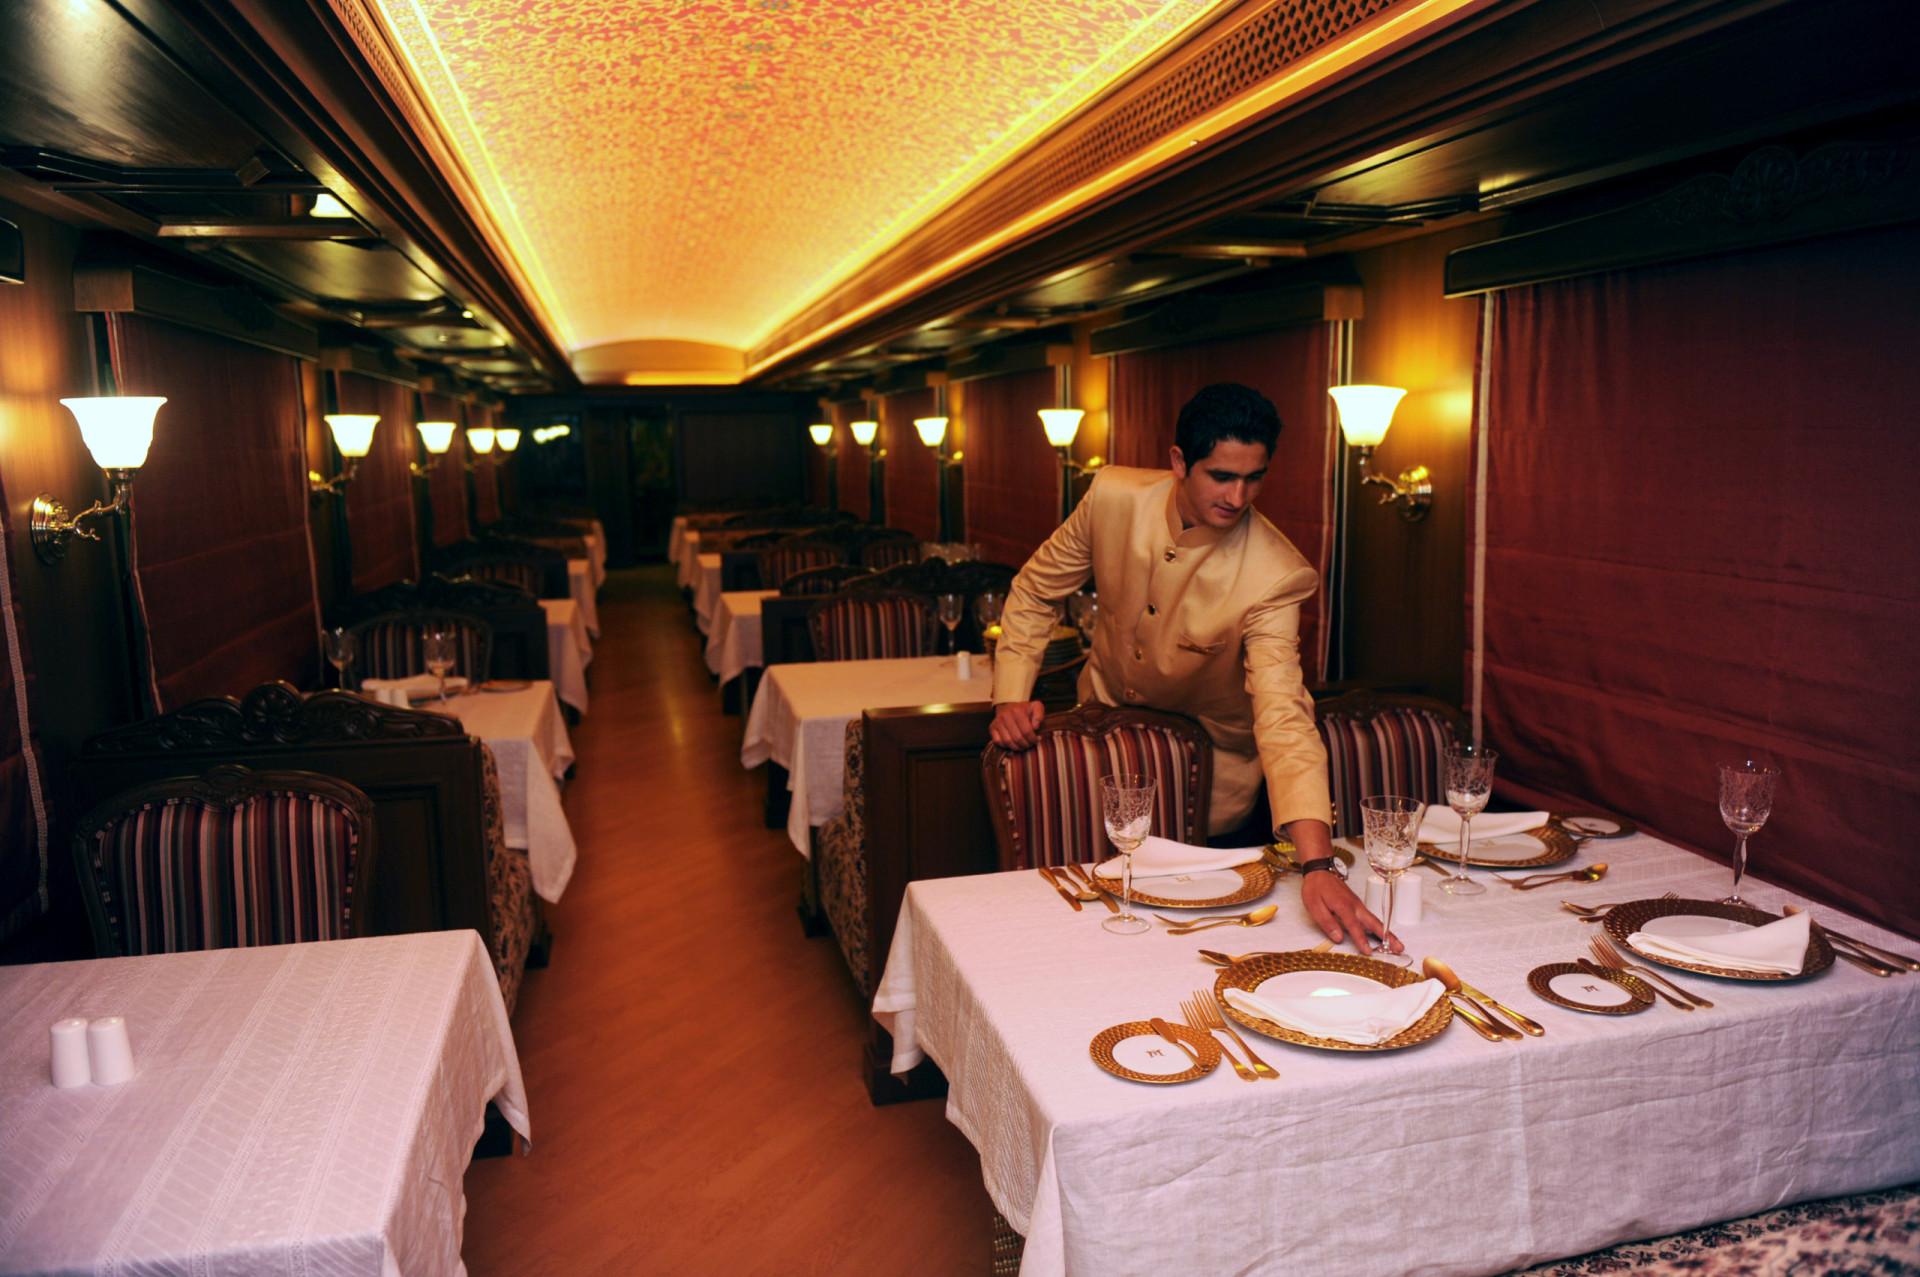 <p>At around US$4,500 per night for the Presidential Suite, India’s Maharaja’s Express is definitely on the right side of the tracks! Taking you to some of India's most emblematic sights, this train has all the amenities needed for a luxurious ride.</p><p><a href="https://www.msn.com/en-us/community/channel/vid-7xx8mnucu55yw63we9va2gwr7uihbxwc68fxqp25x6tg4ftibpra?cvid=94631541bc0f4f89bfd59158d696ad7e">Follow us and access great exclusive content every day</a></p>